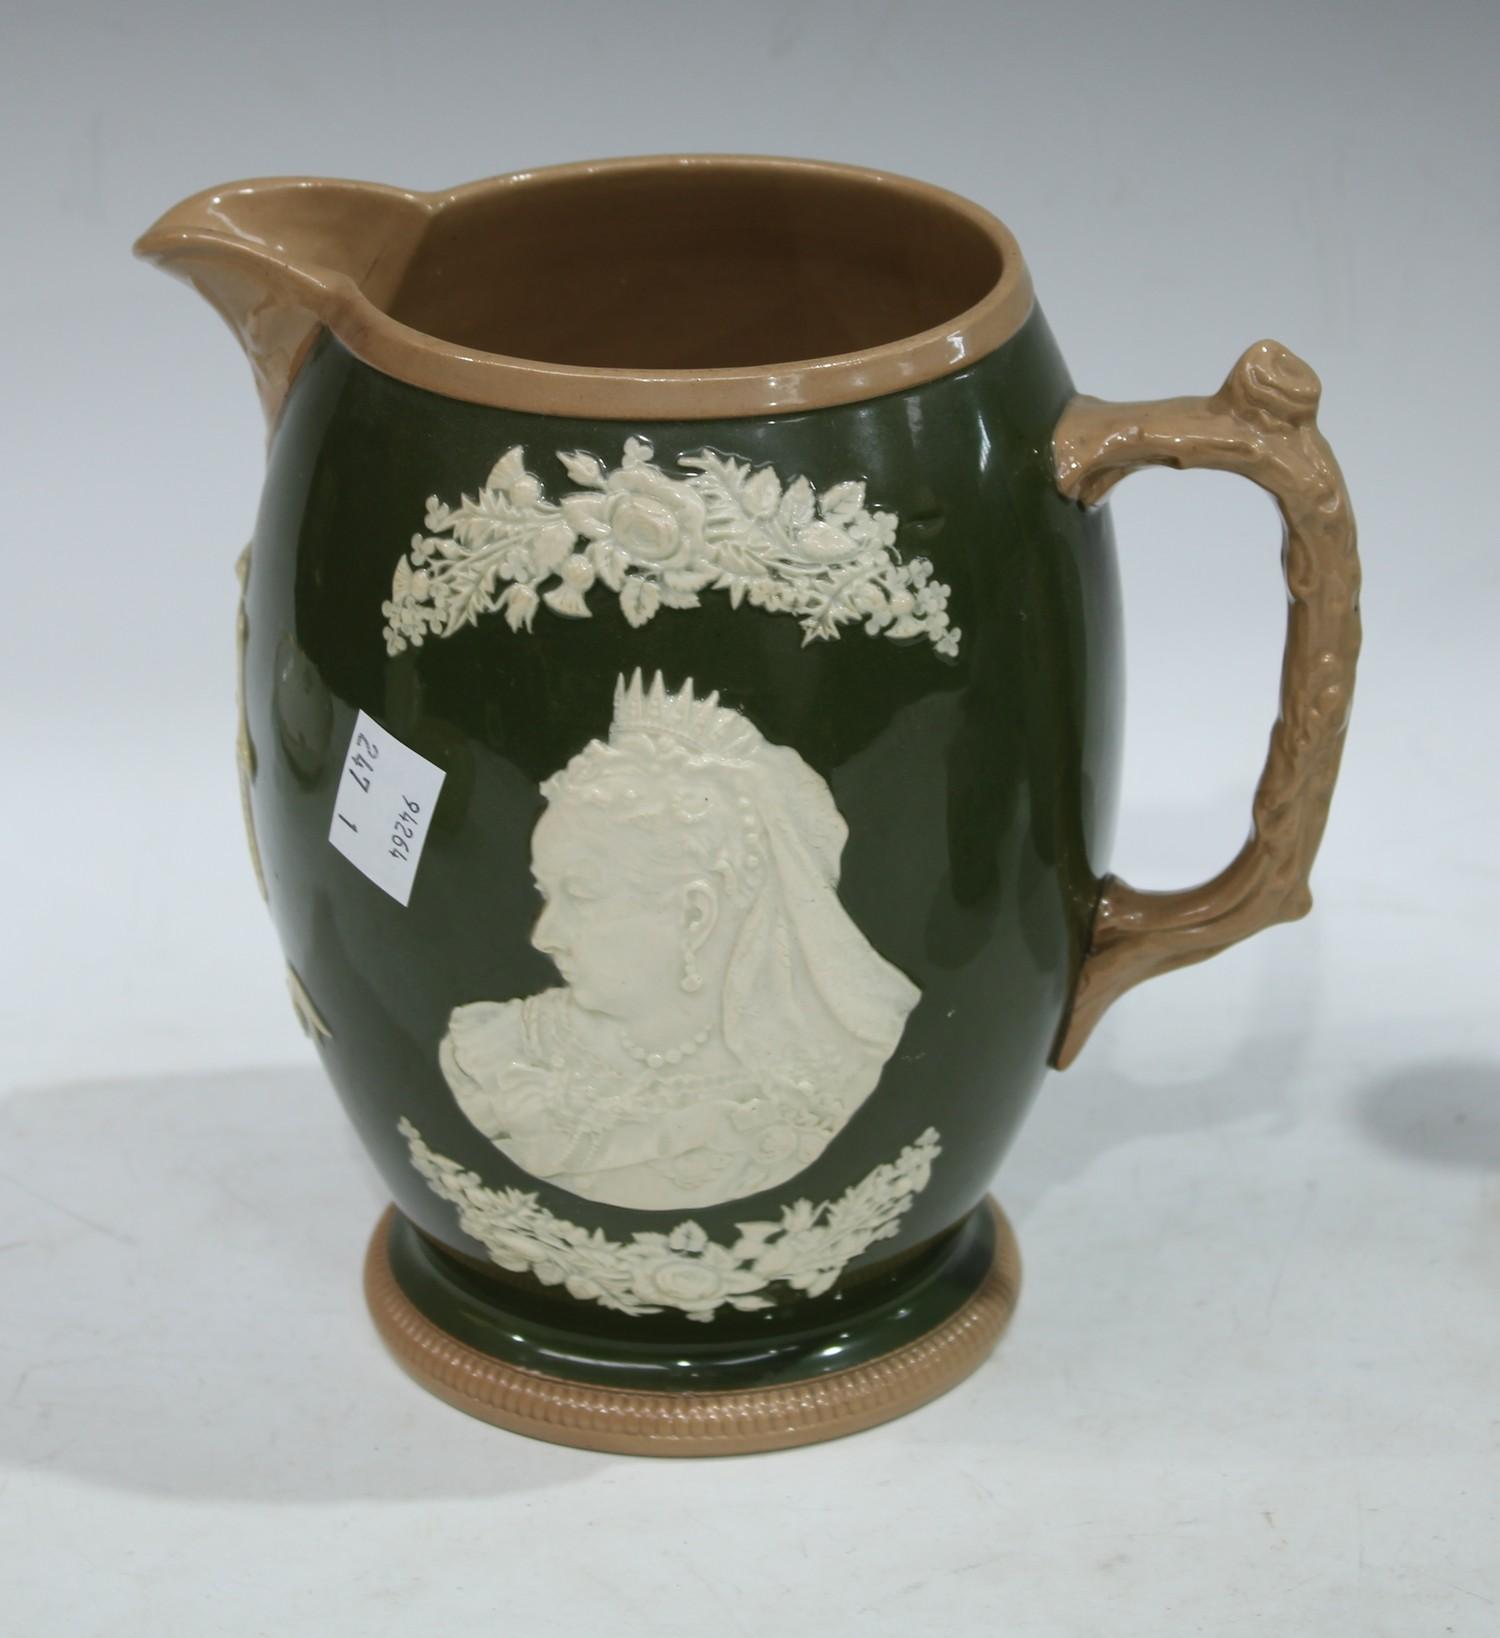 A Copeland Spode jug, Victoria Queen and Empress 1837 Diamond Jubilee 1897, impressed and printed